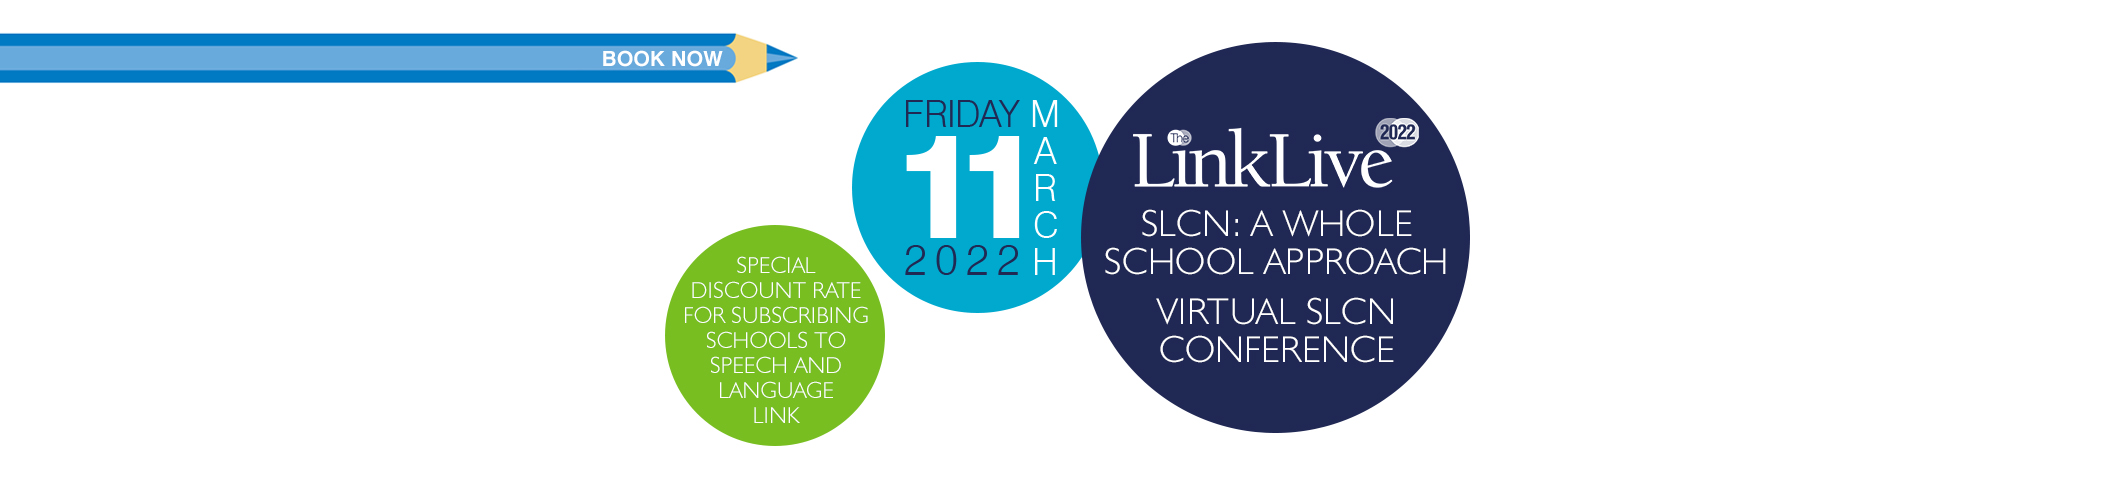 The Link Live 2022 SLCN:A Whole-School Approach